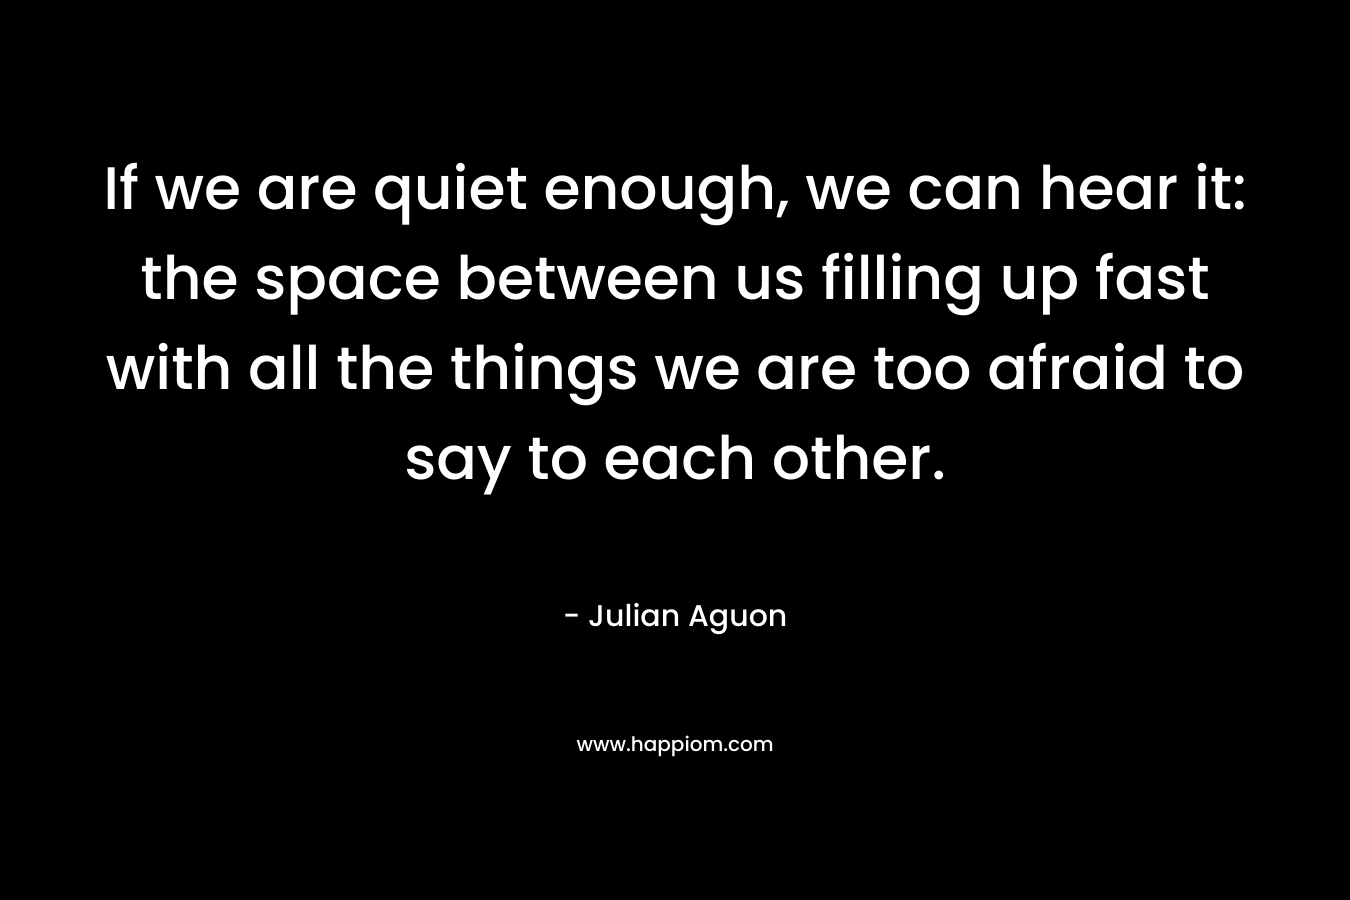 If we are quiet enough, we can hear it: the space between us filling up fast with all the things we are too afraid to say to each other. – Julian Aguon